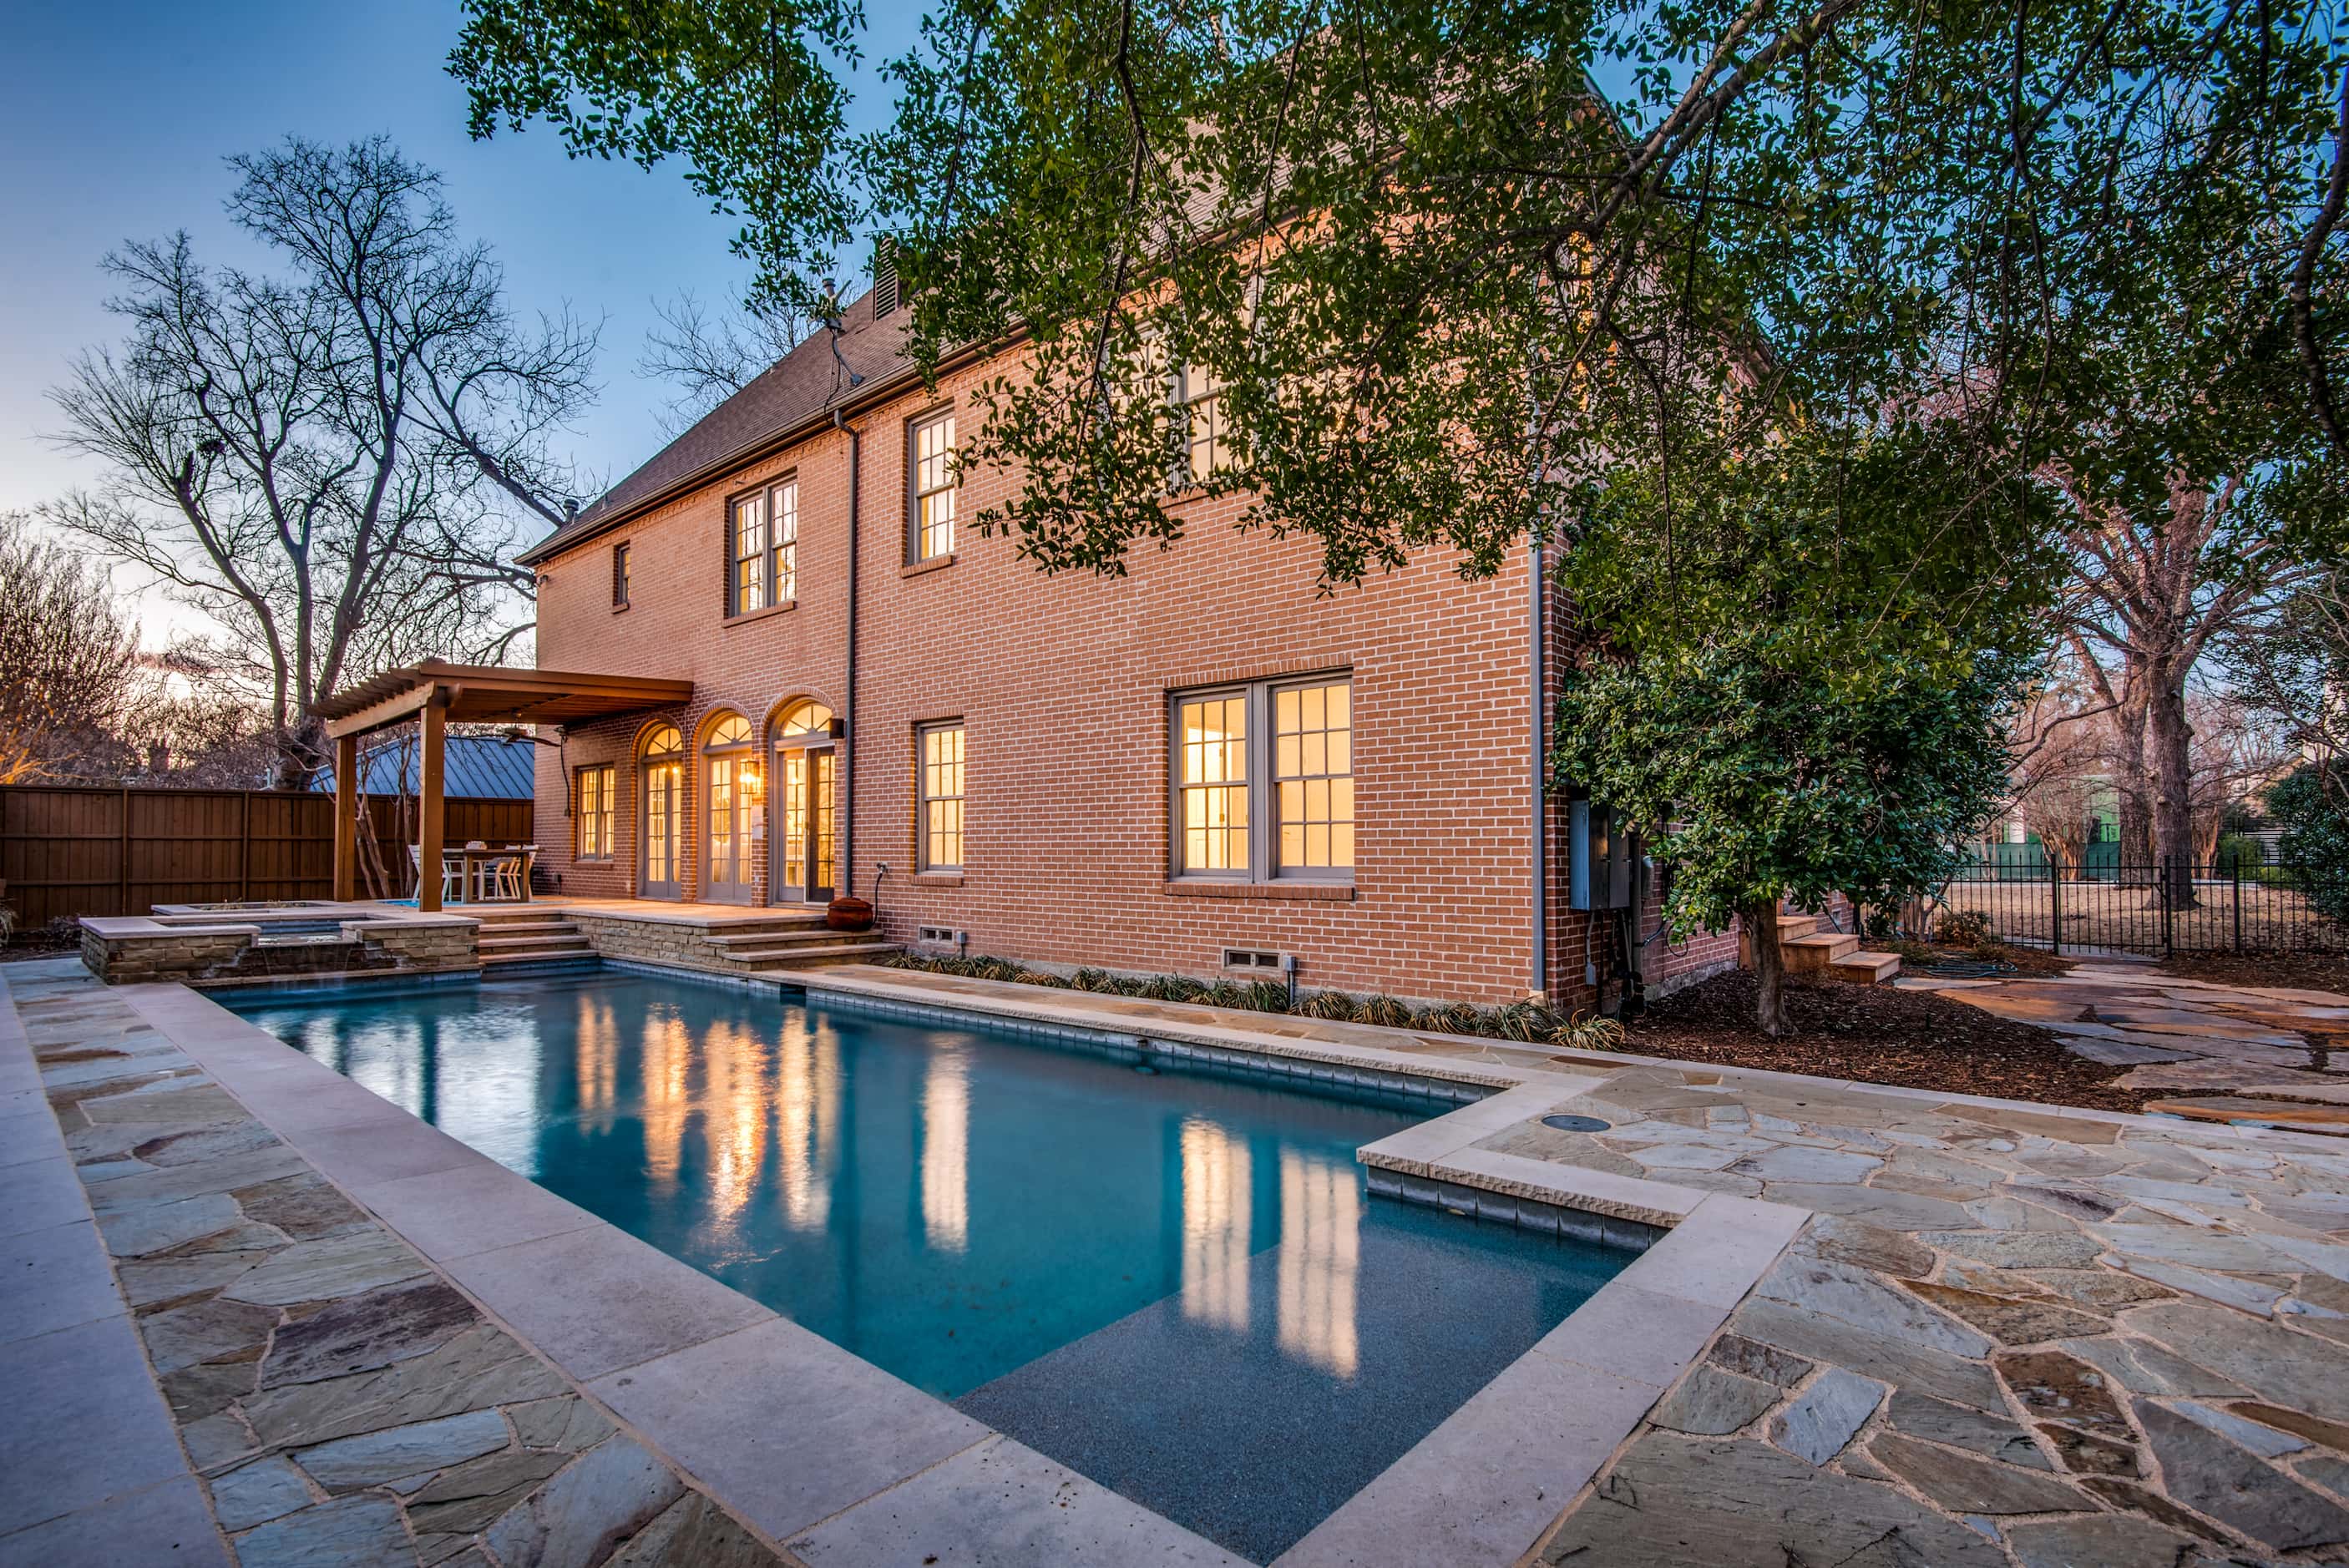 The backyard features a pool, a covered patio, and a side yard.